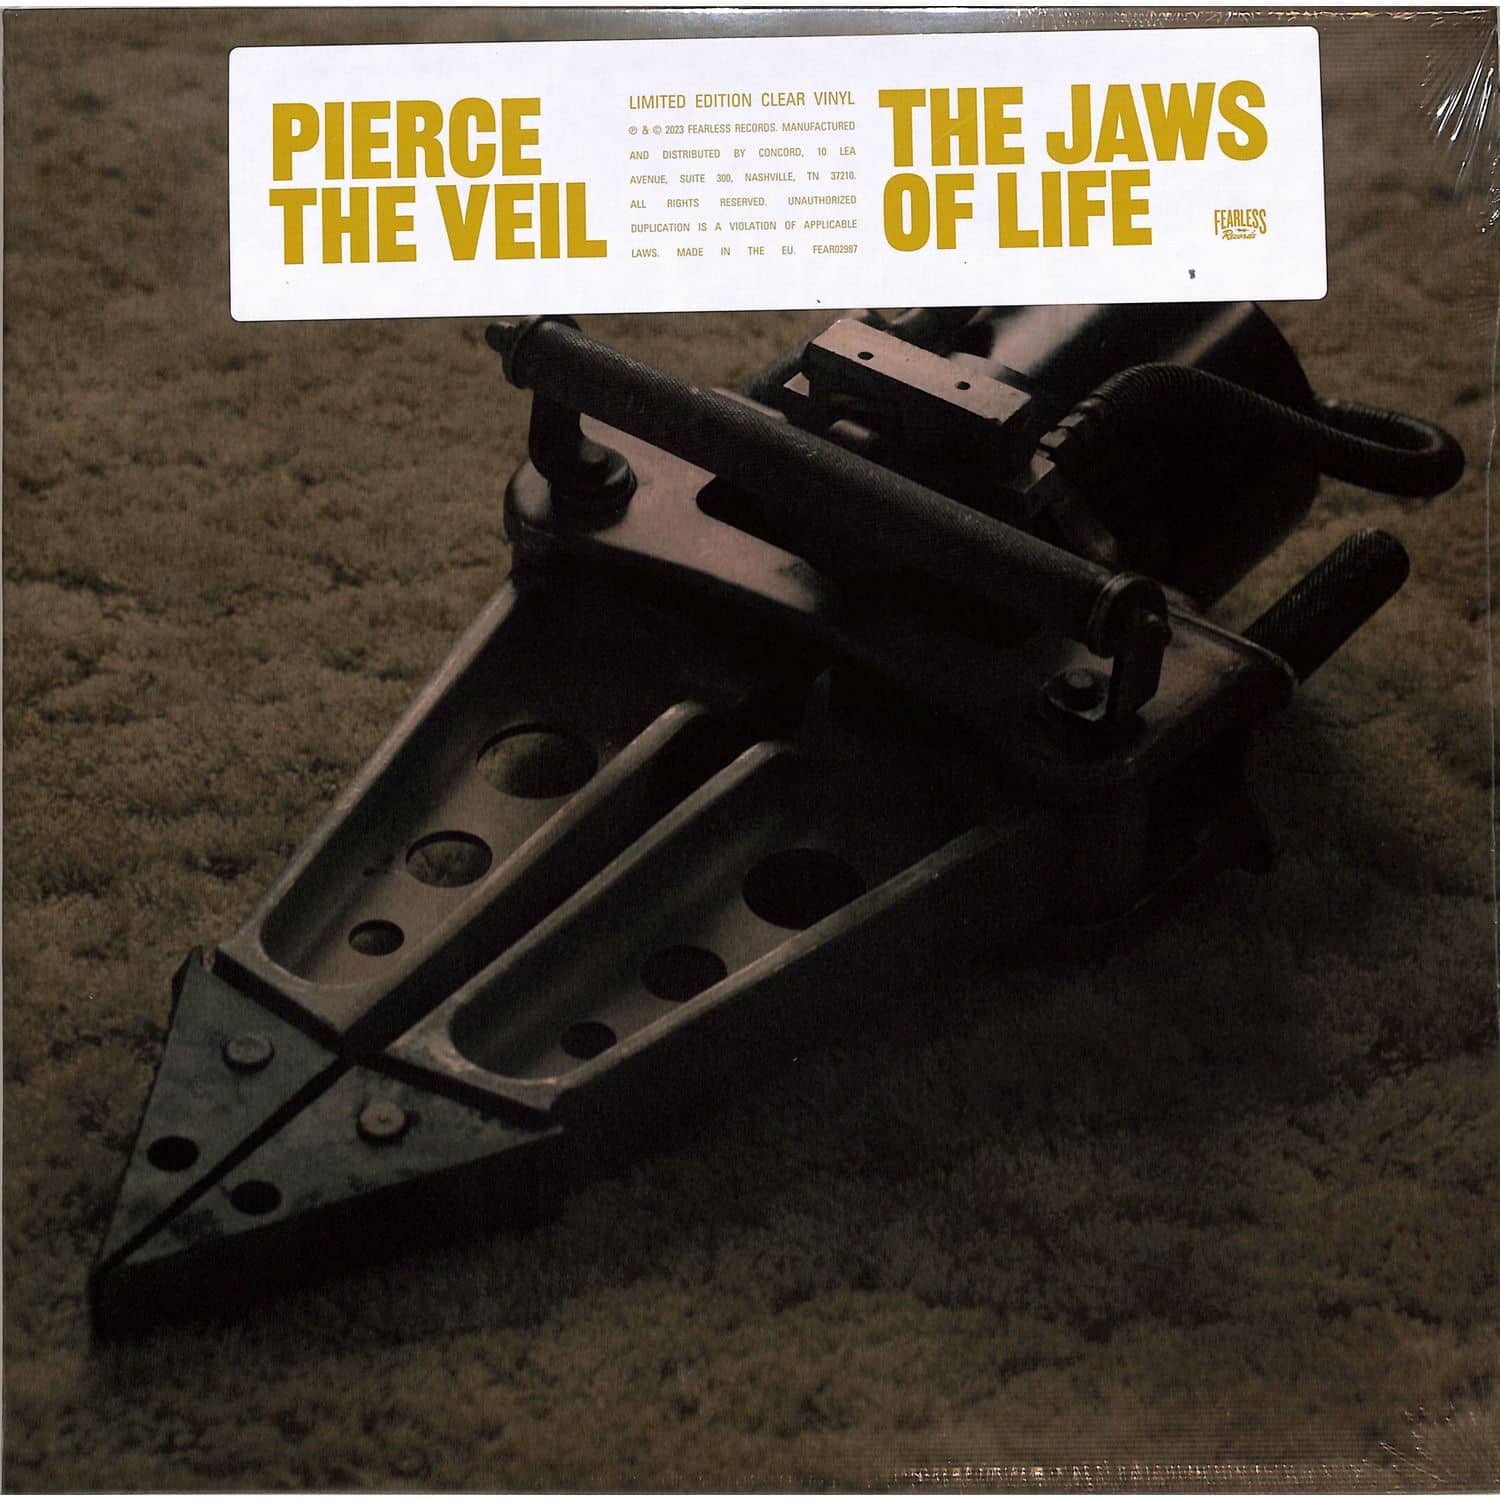 Pierce The Veil - THE JAWS OF LIFE 